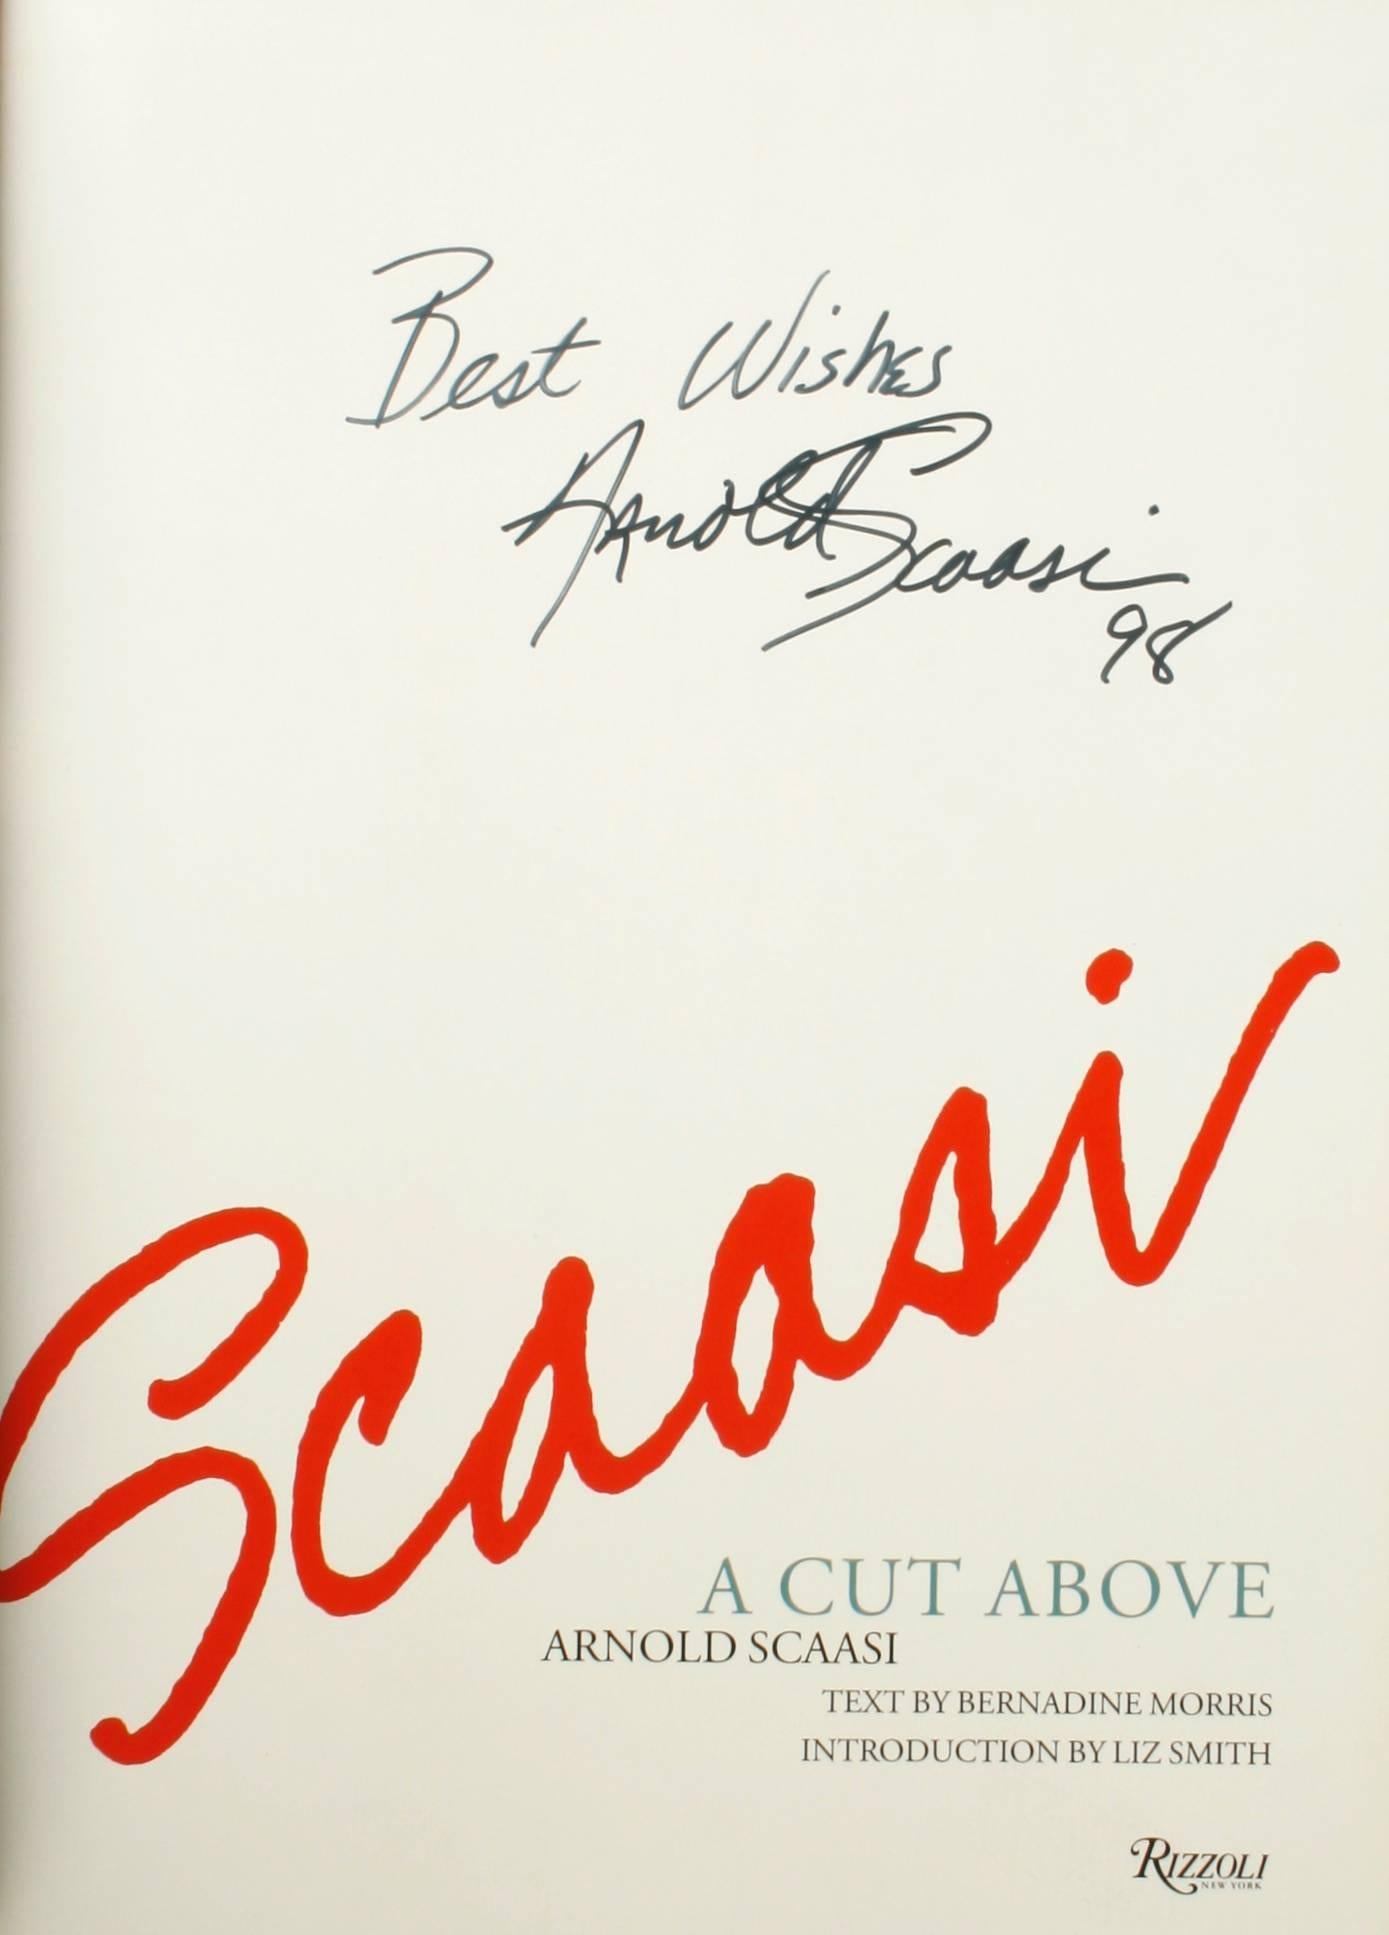 Scaasi, a cut above, Arnold Scaasi. New York: Rizzoli, 1996. Signed first edition hardcover with dust jacket. 190 pp. A beautiful fashion retrospective of the highly successful career of designer Arnold Scaasi with a look at the private, social and